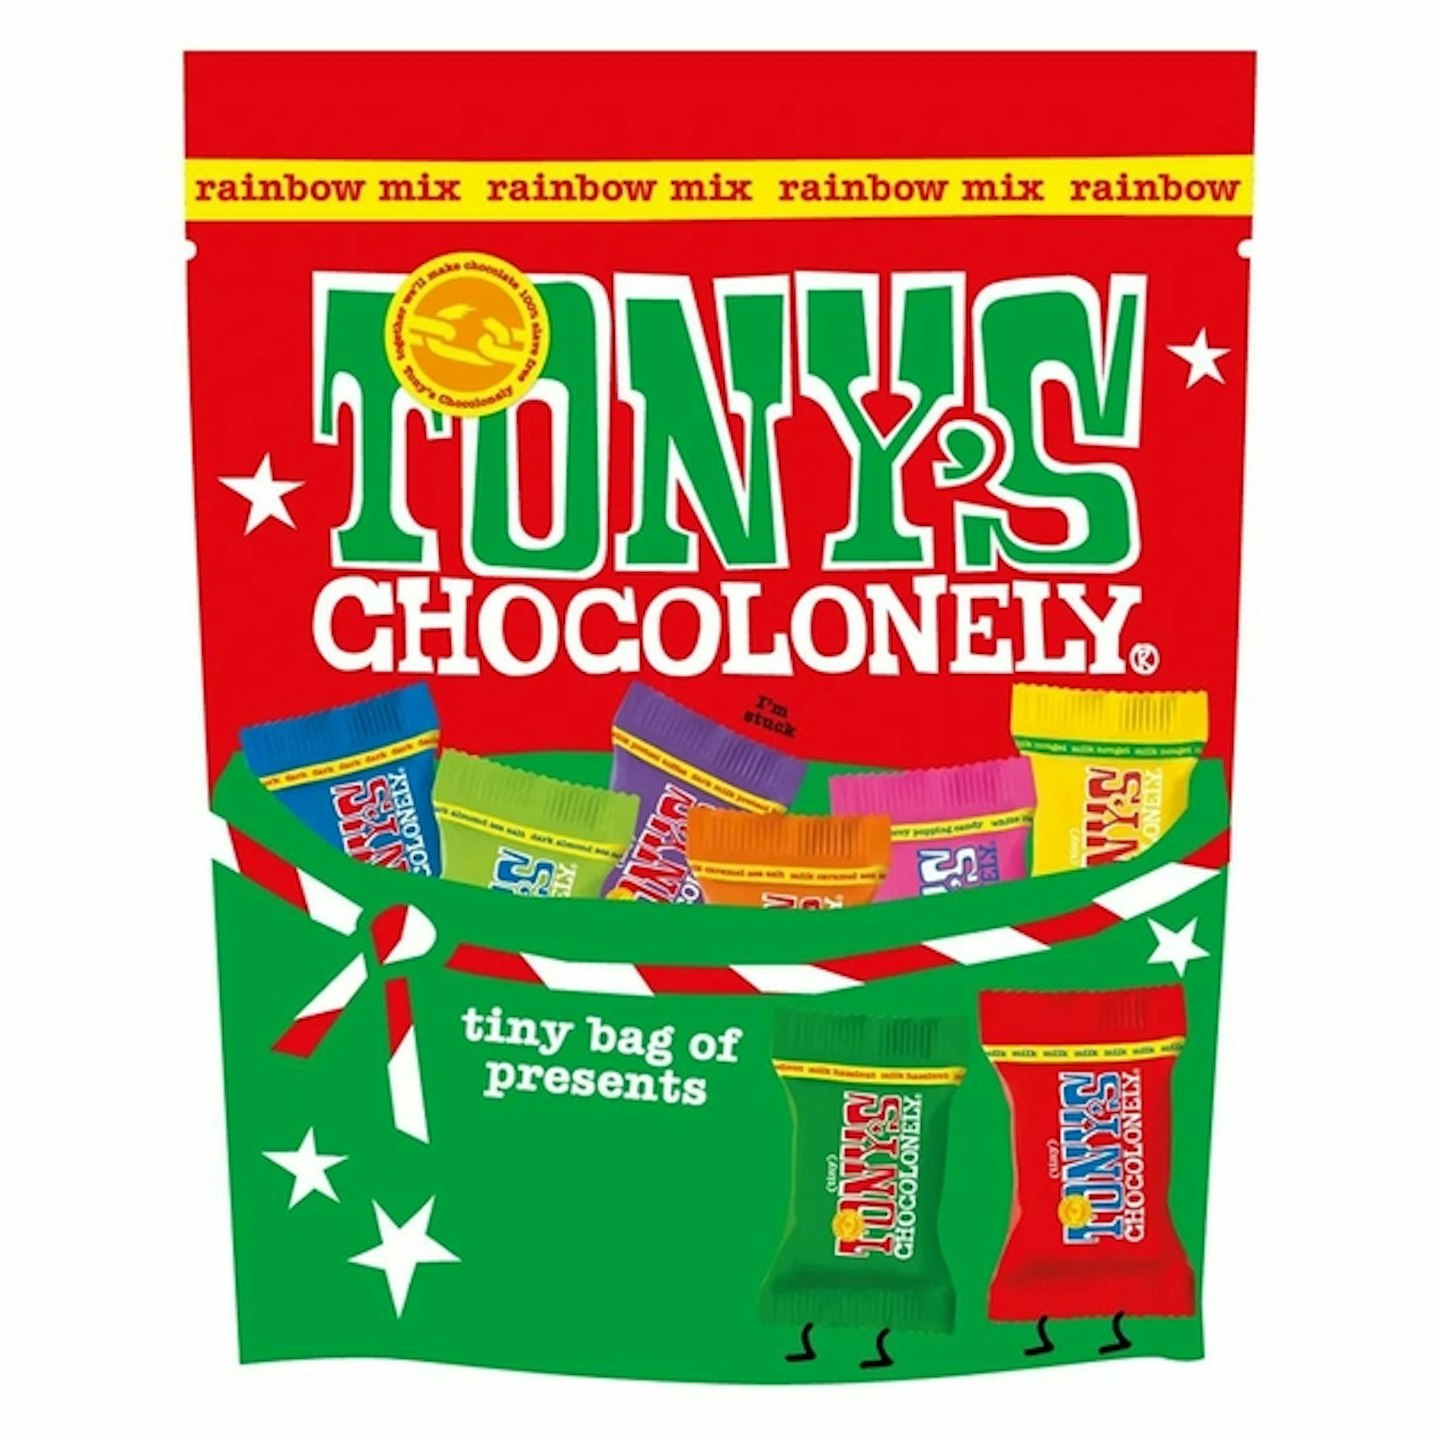 Tony's Chocolonely - Christmas dinner essentials